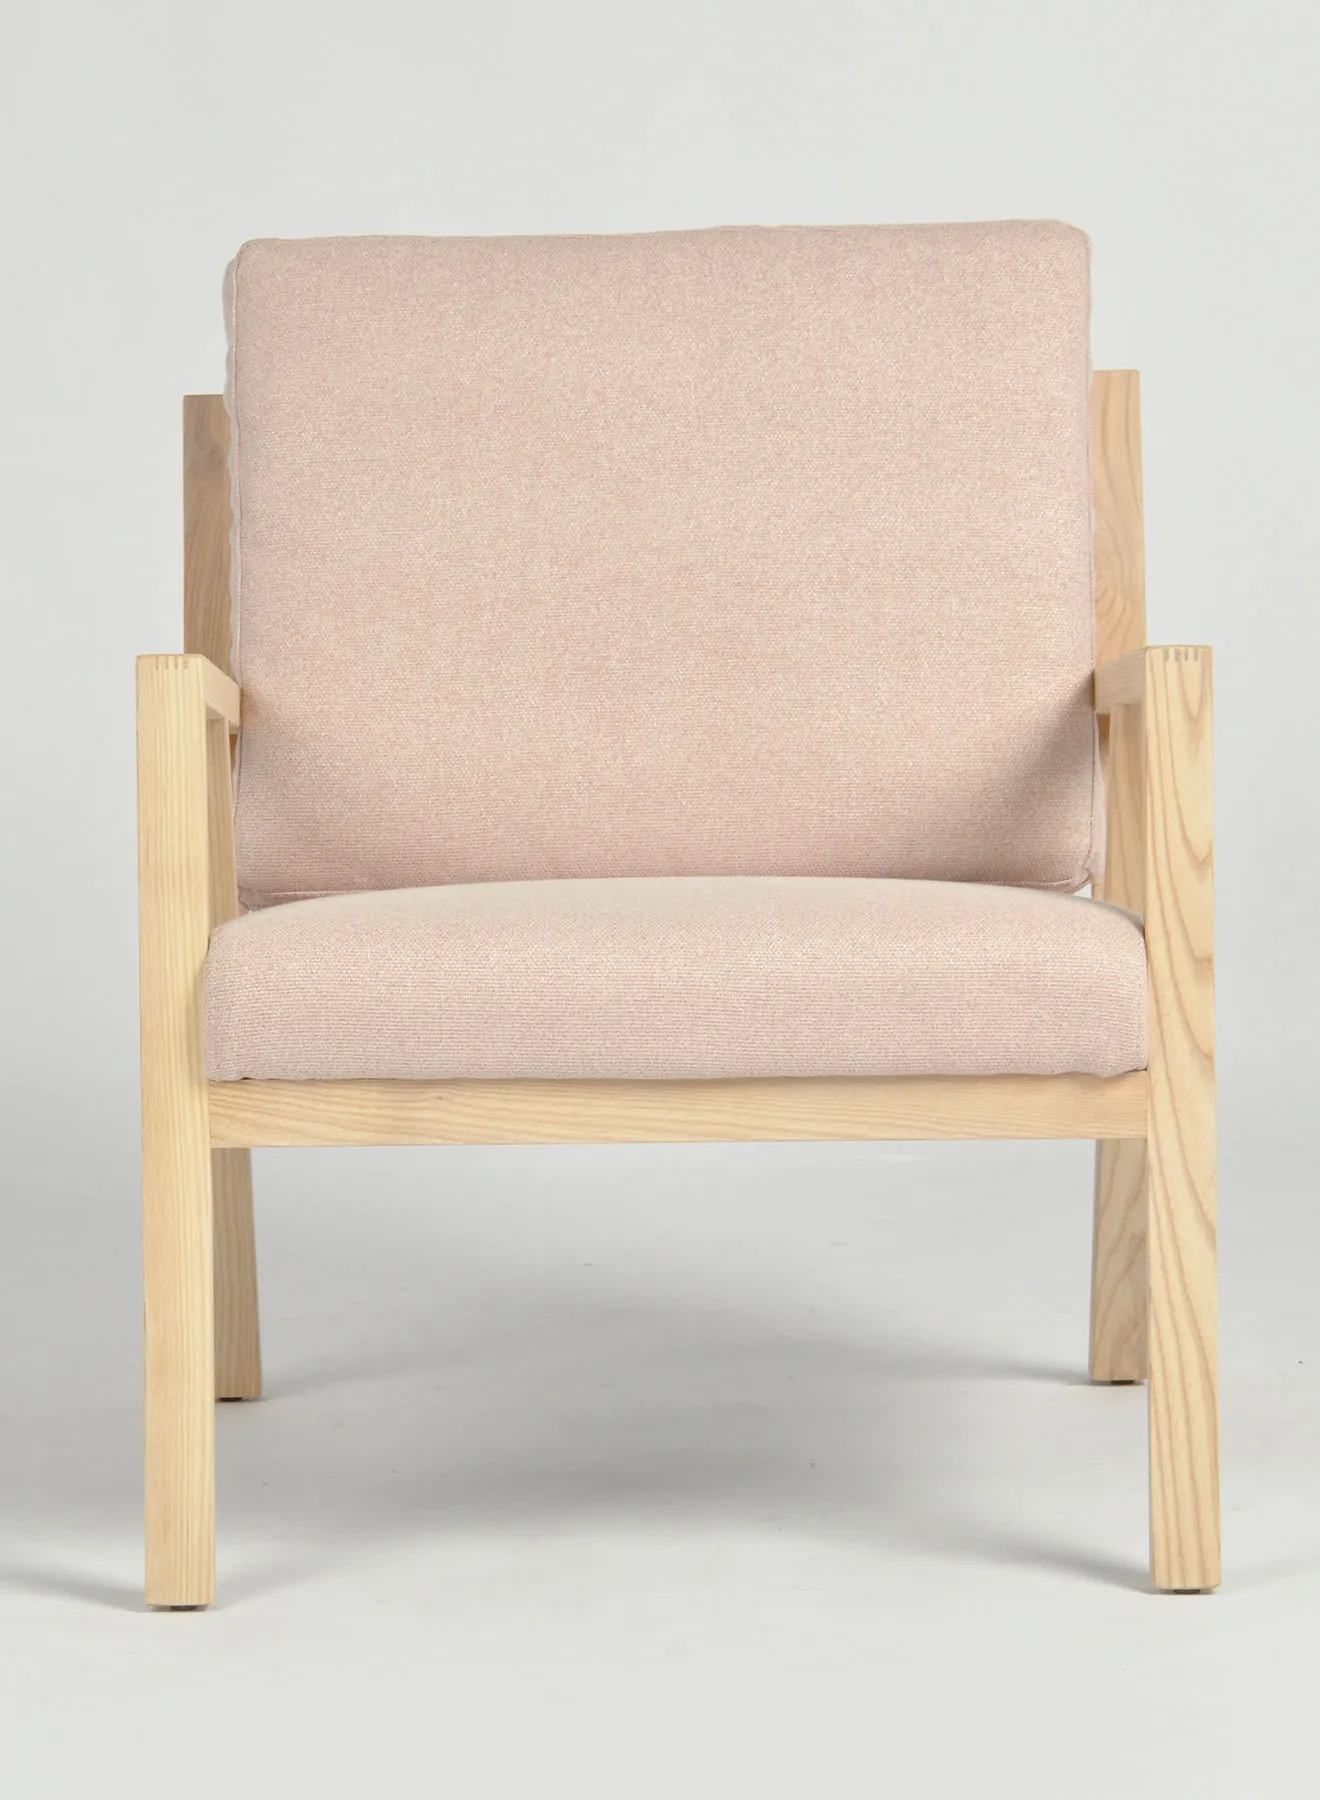 Switch Armchair In Pink Size 67 X 79 X 76